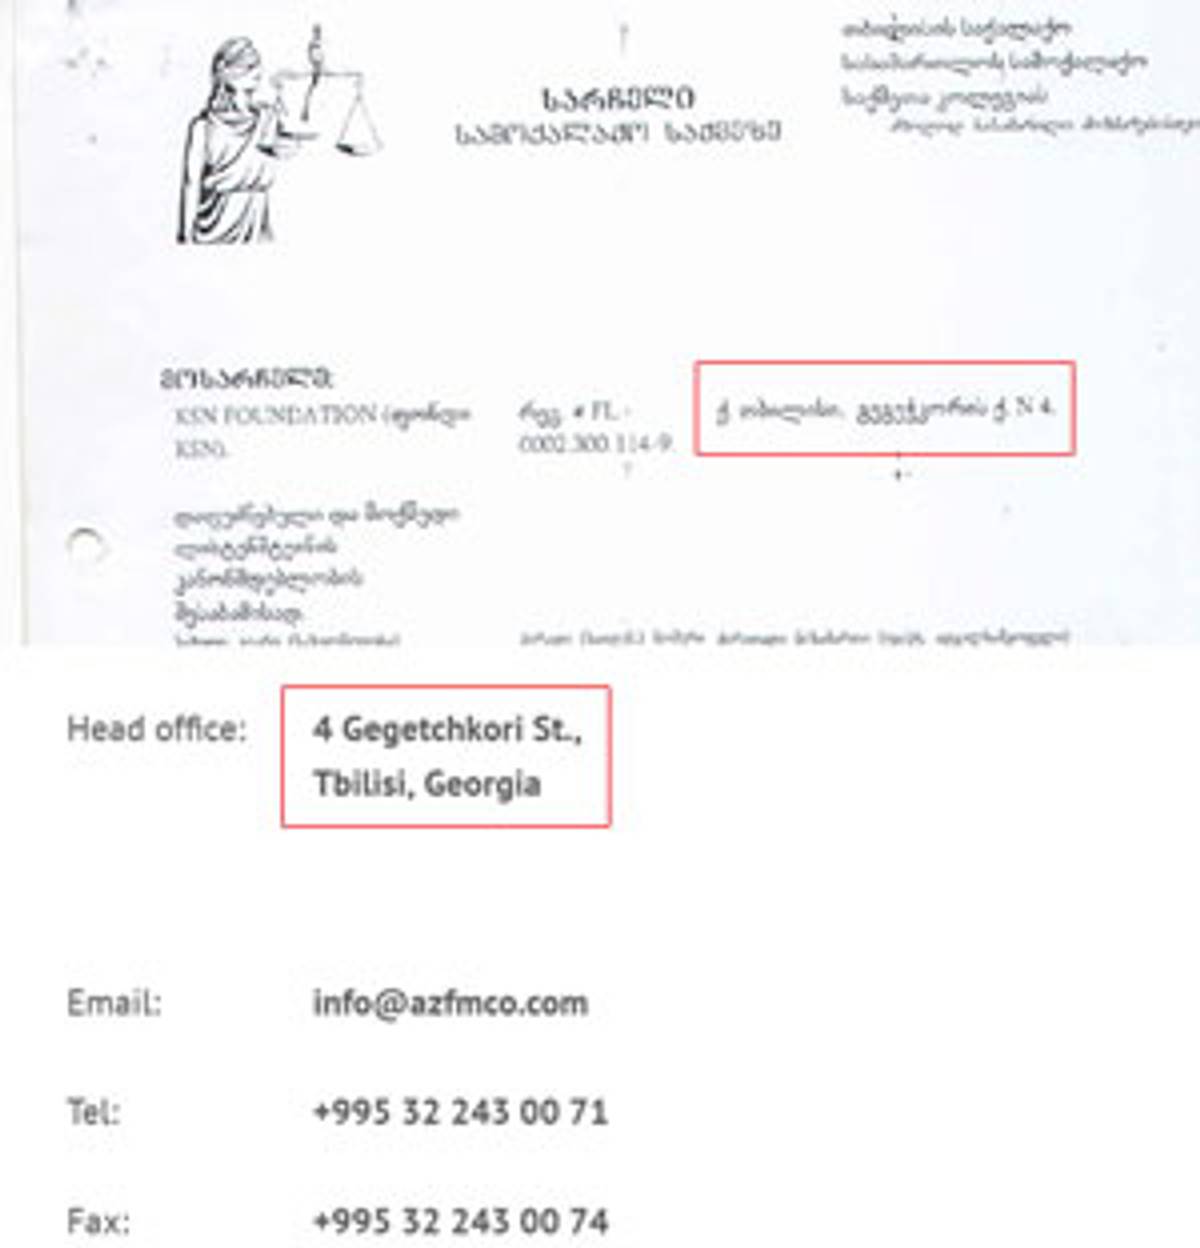 The first page of the lawsuit brought by KSN Foundation against Capital Bank JSC principal shareholder, showing Gegetchkori Street 4, the same as Azeri Fund’s website, as their registered address.